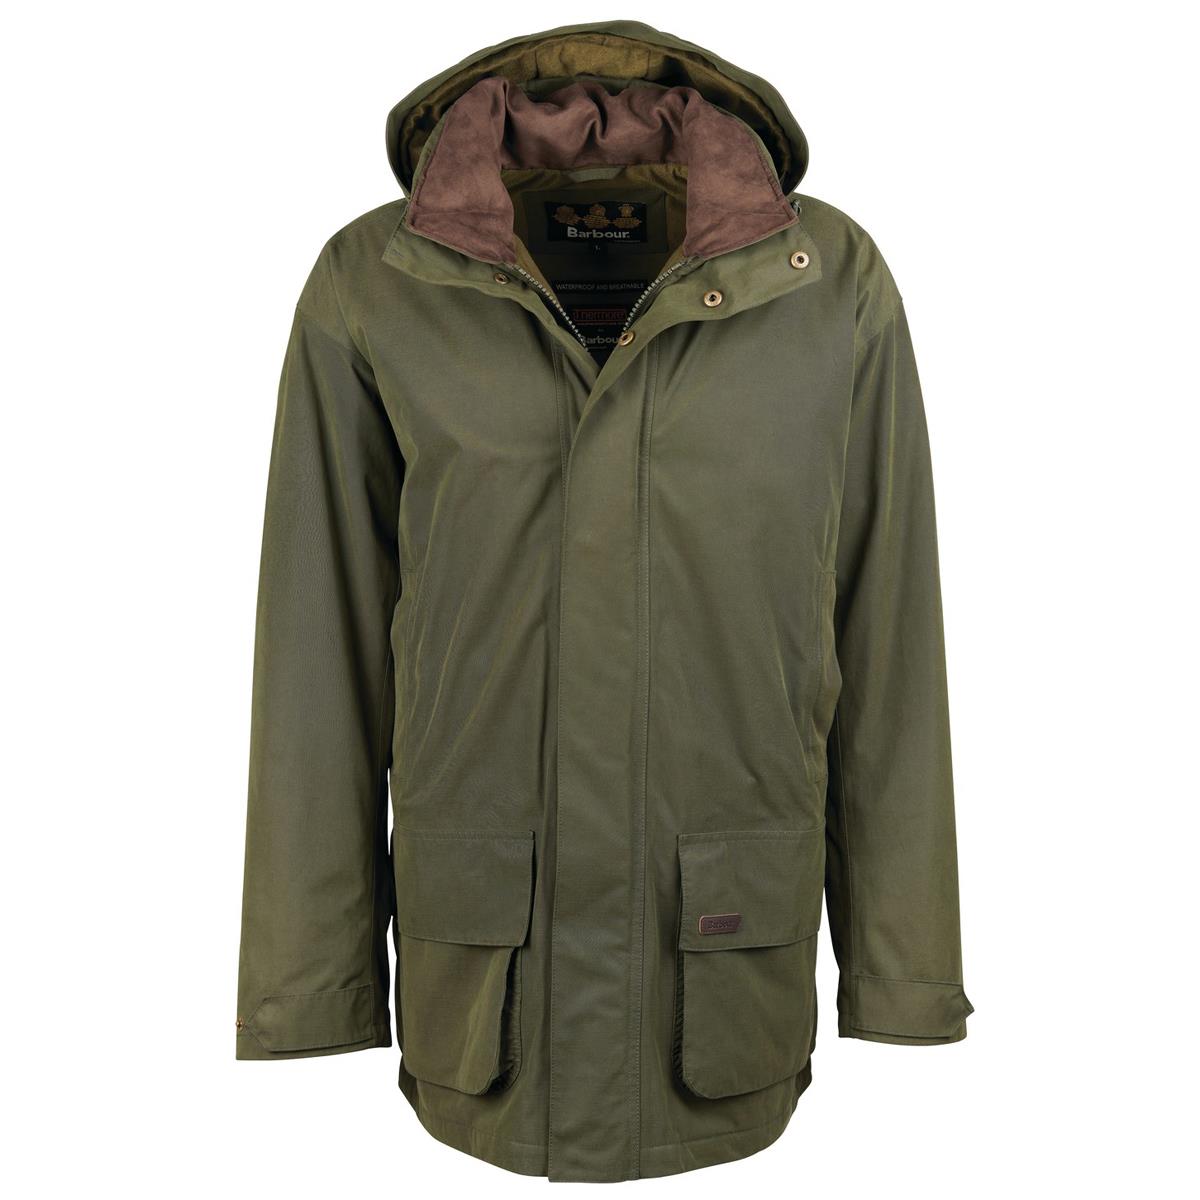 Barbour Mens Beaconsfield Jacket Questions & Answers